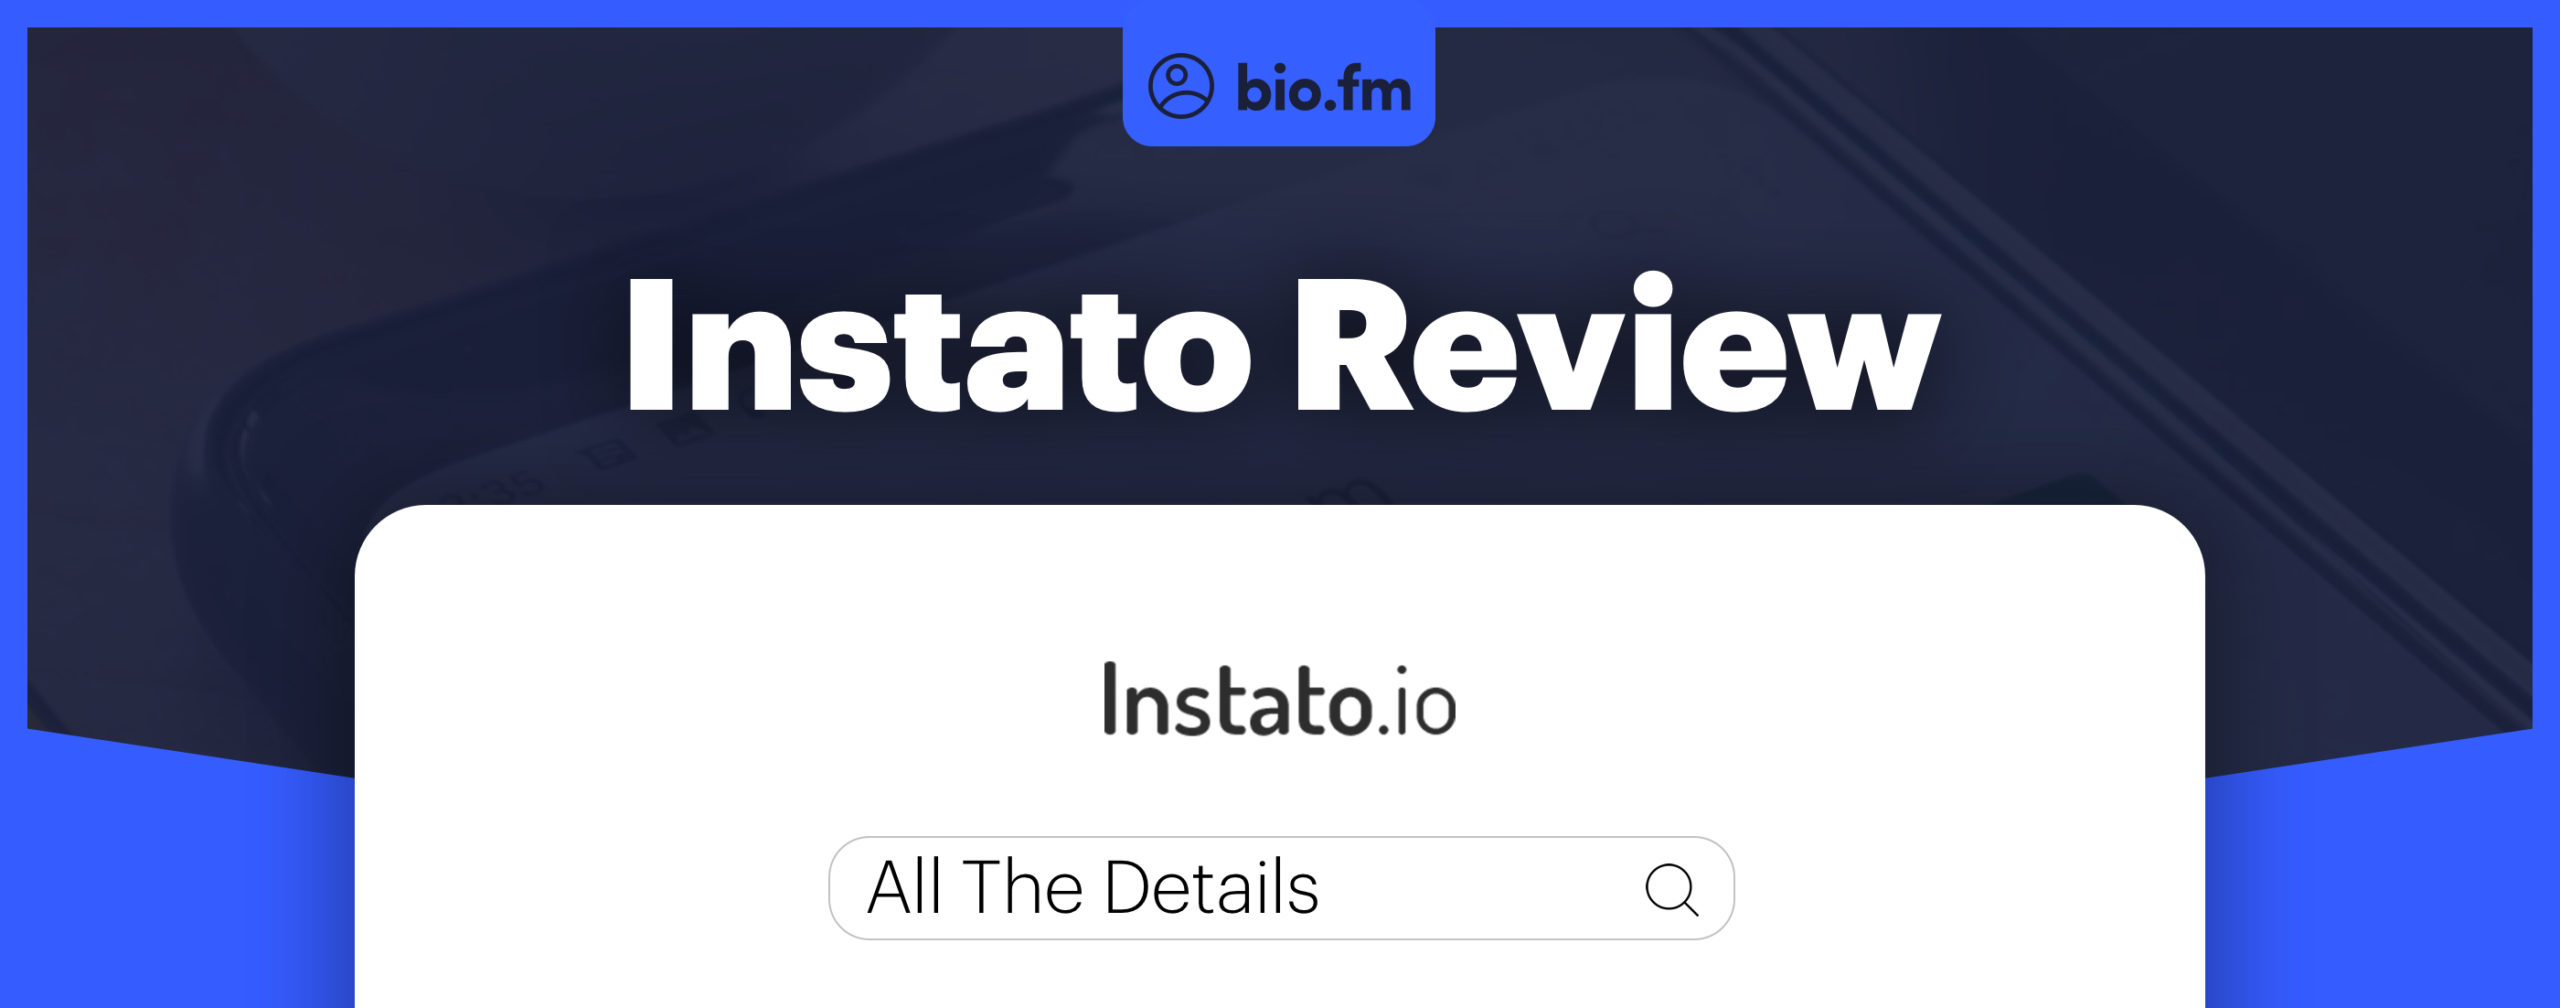 instato review featured image